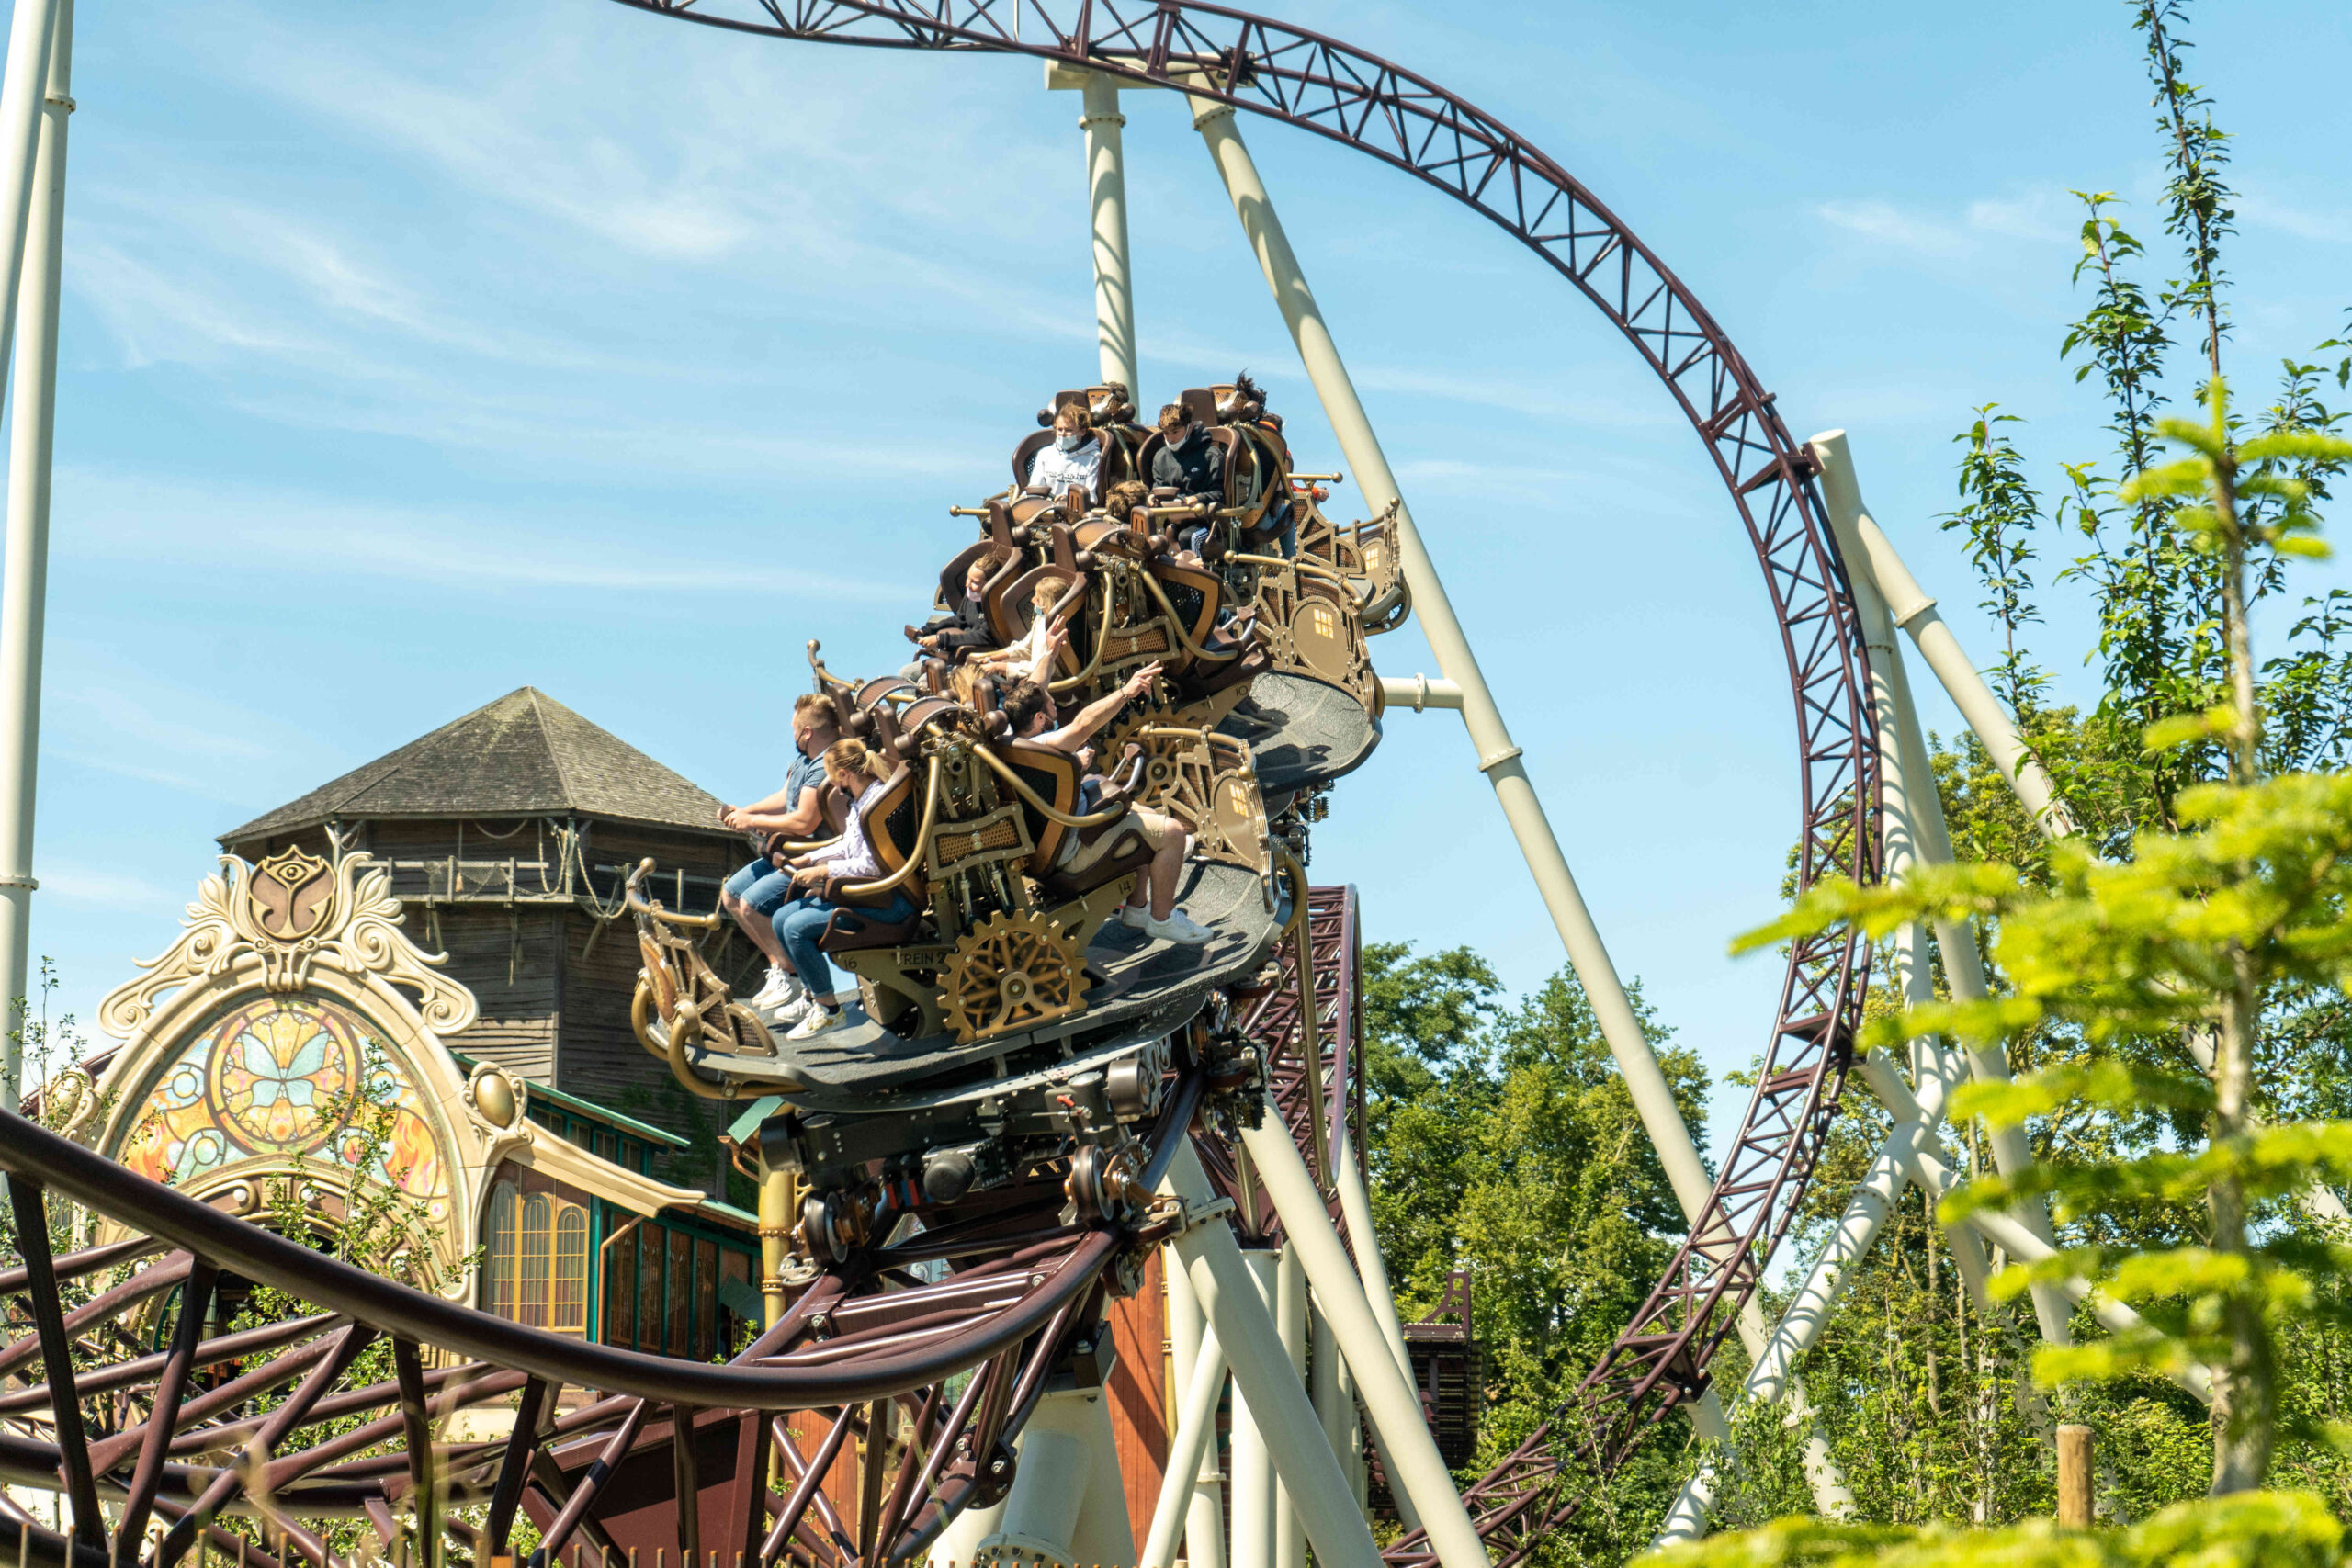 The Ride To Happiness in Plopsaland